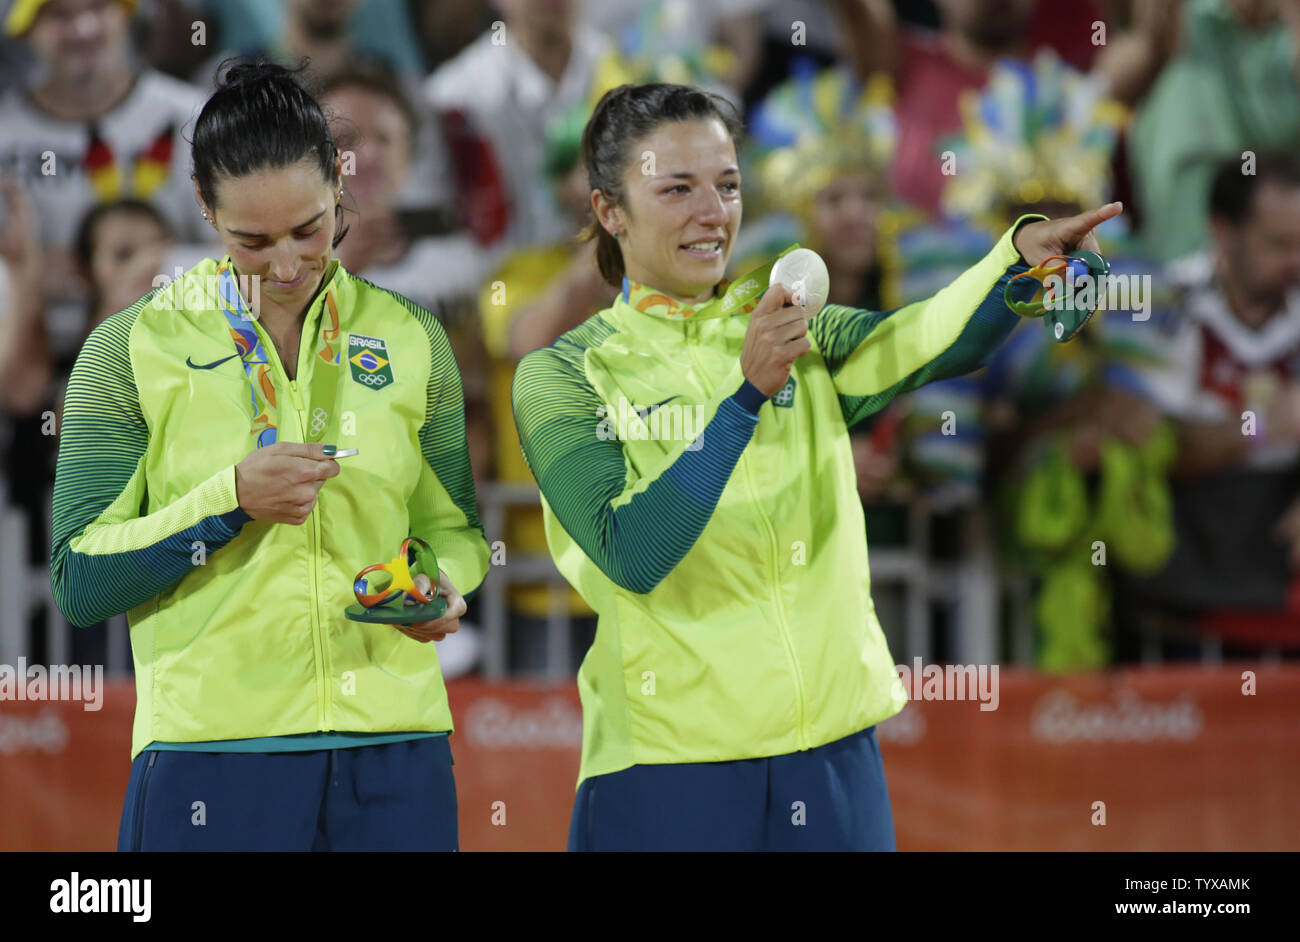 Agatha Bednarczuk Rippel and Barbara Seixas de Freitas of Brazil celebrate after winning the silver medal in the Beach Volleyball Women's match at the Beach Volleyball Arena at the 2016 Rio Summer Olympics in Rio de Janeiro, Brazil, on August 17, 2016.      Photo by Matthew Healey/UPI Stock Photo